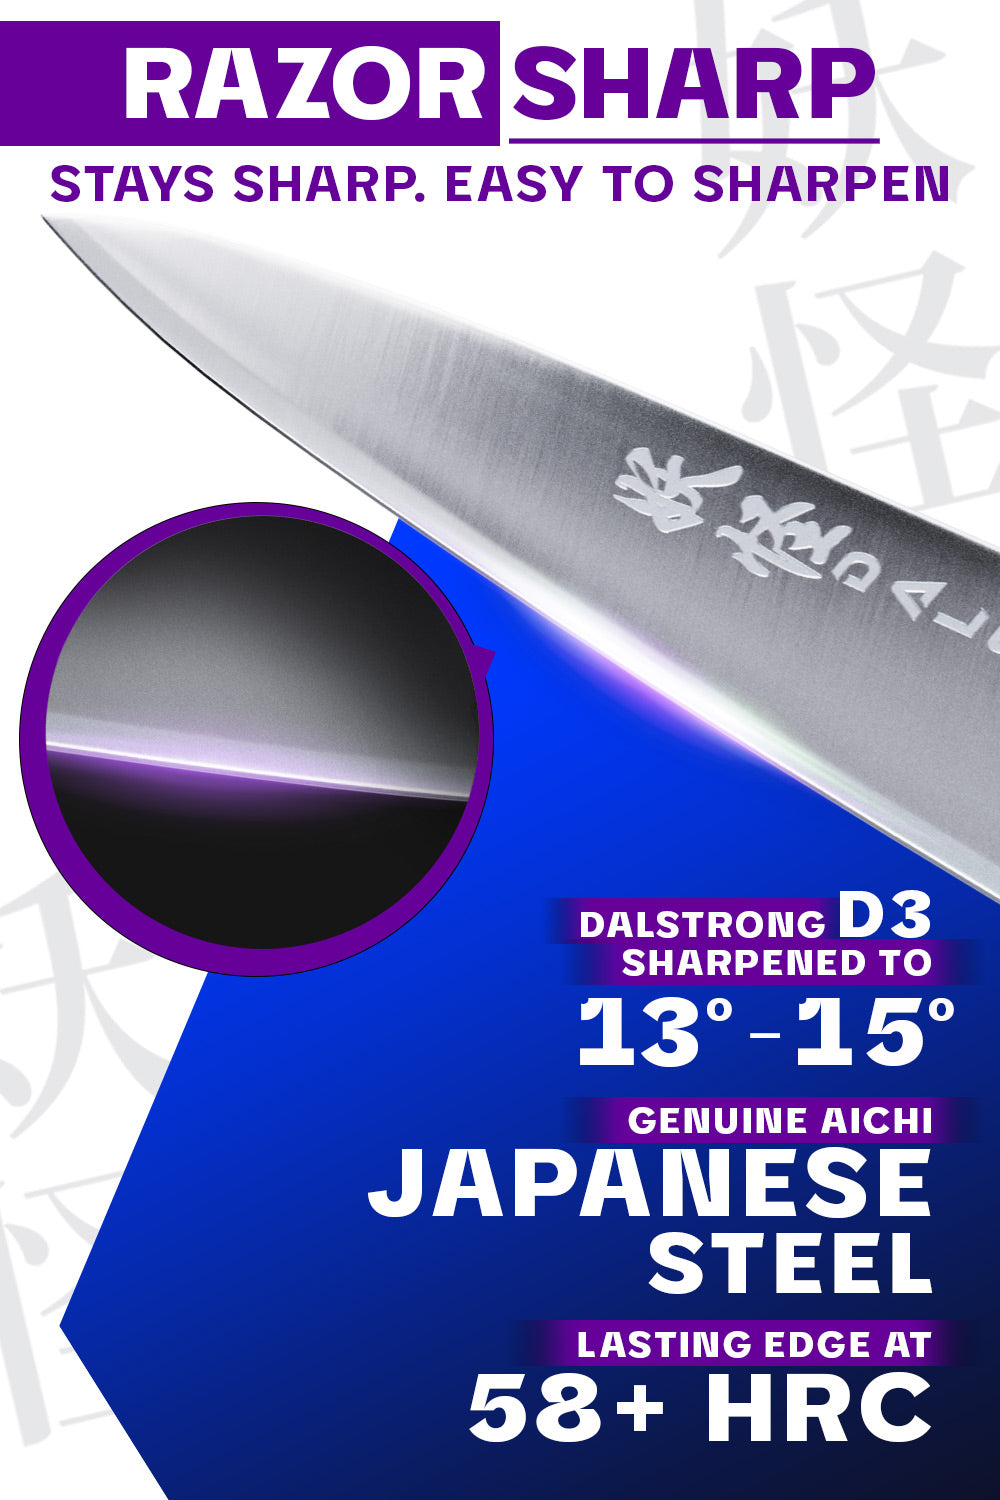 Dalstrong phantom series 8 inch chef knife with red handle featuring it's razor sharp japanese steel blade.